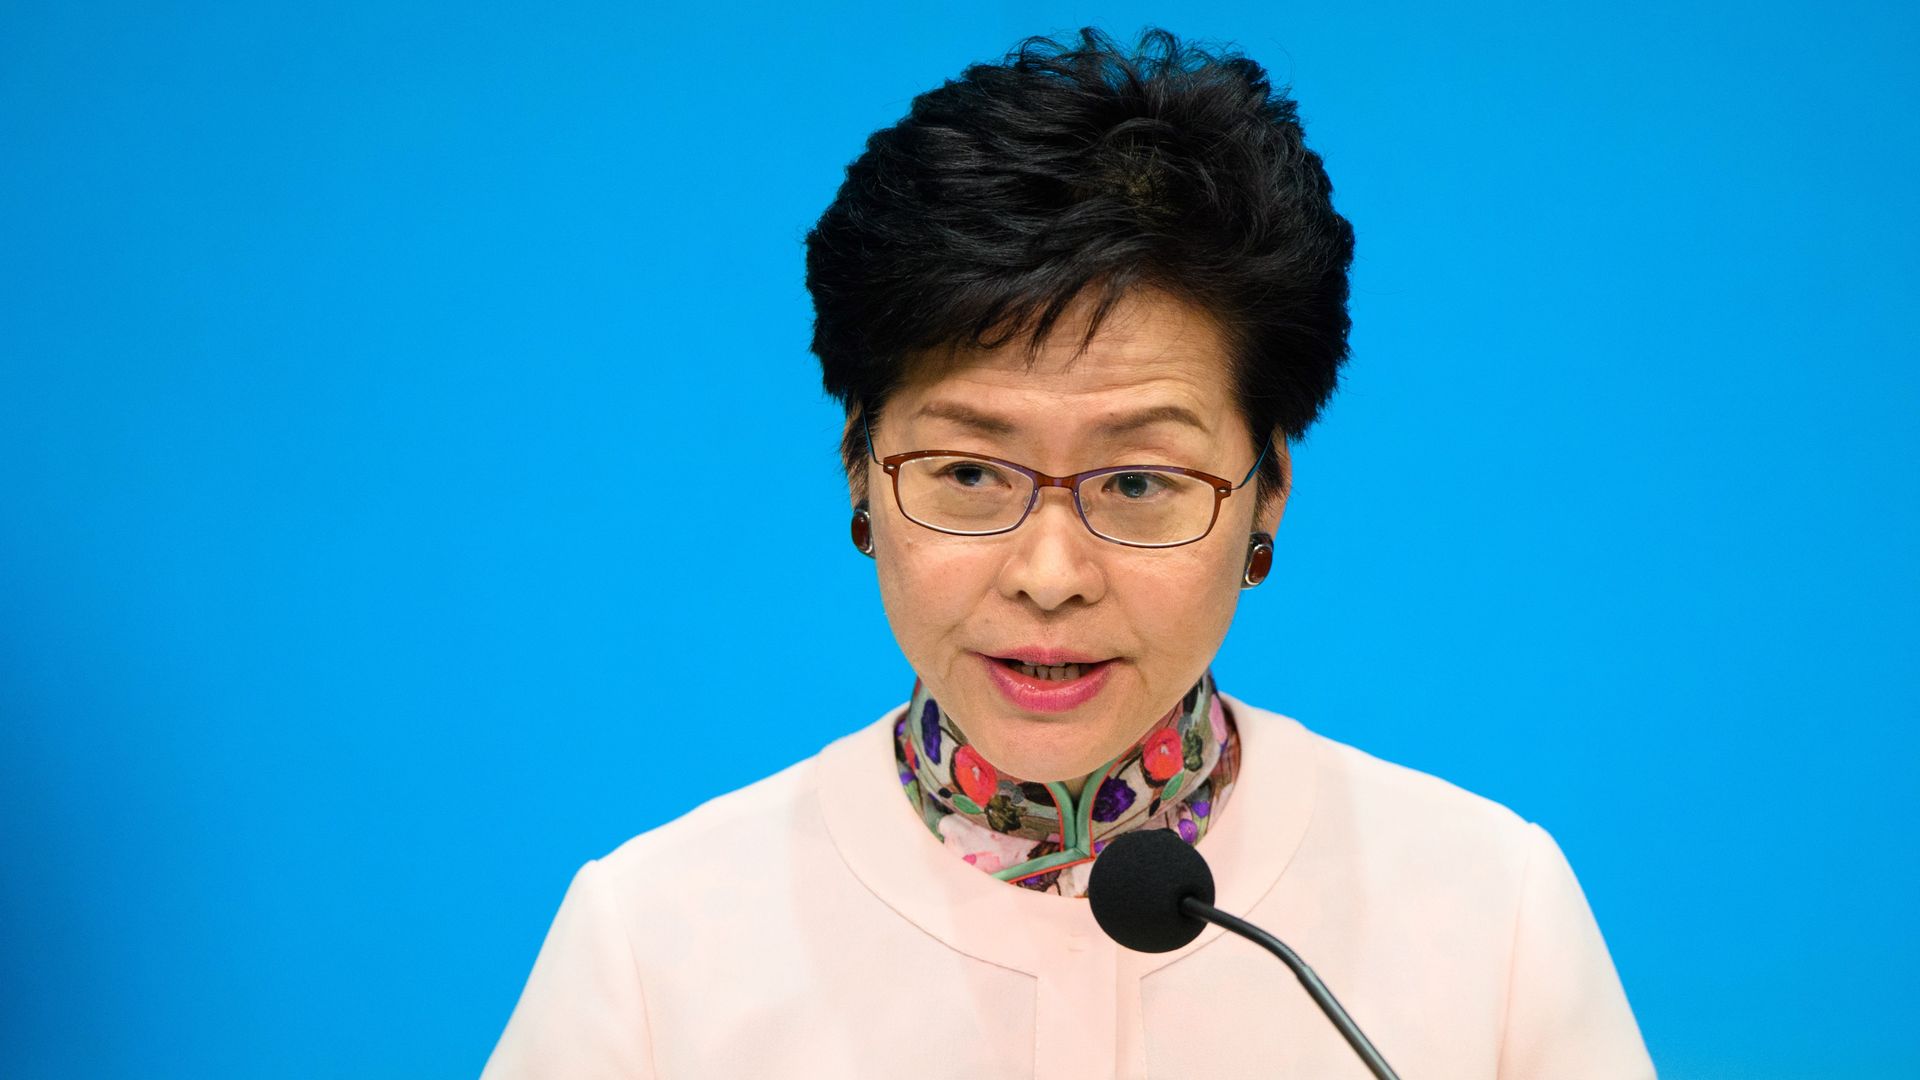 This image shows Carrie Lam in a sweater standing and speaking in front of a microphone.